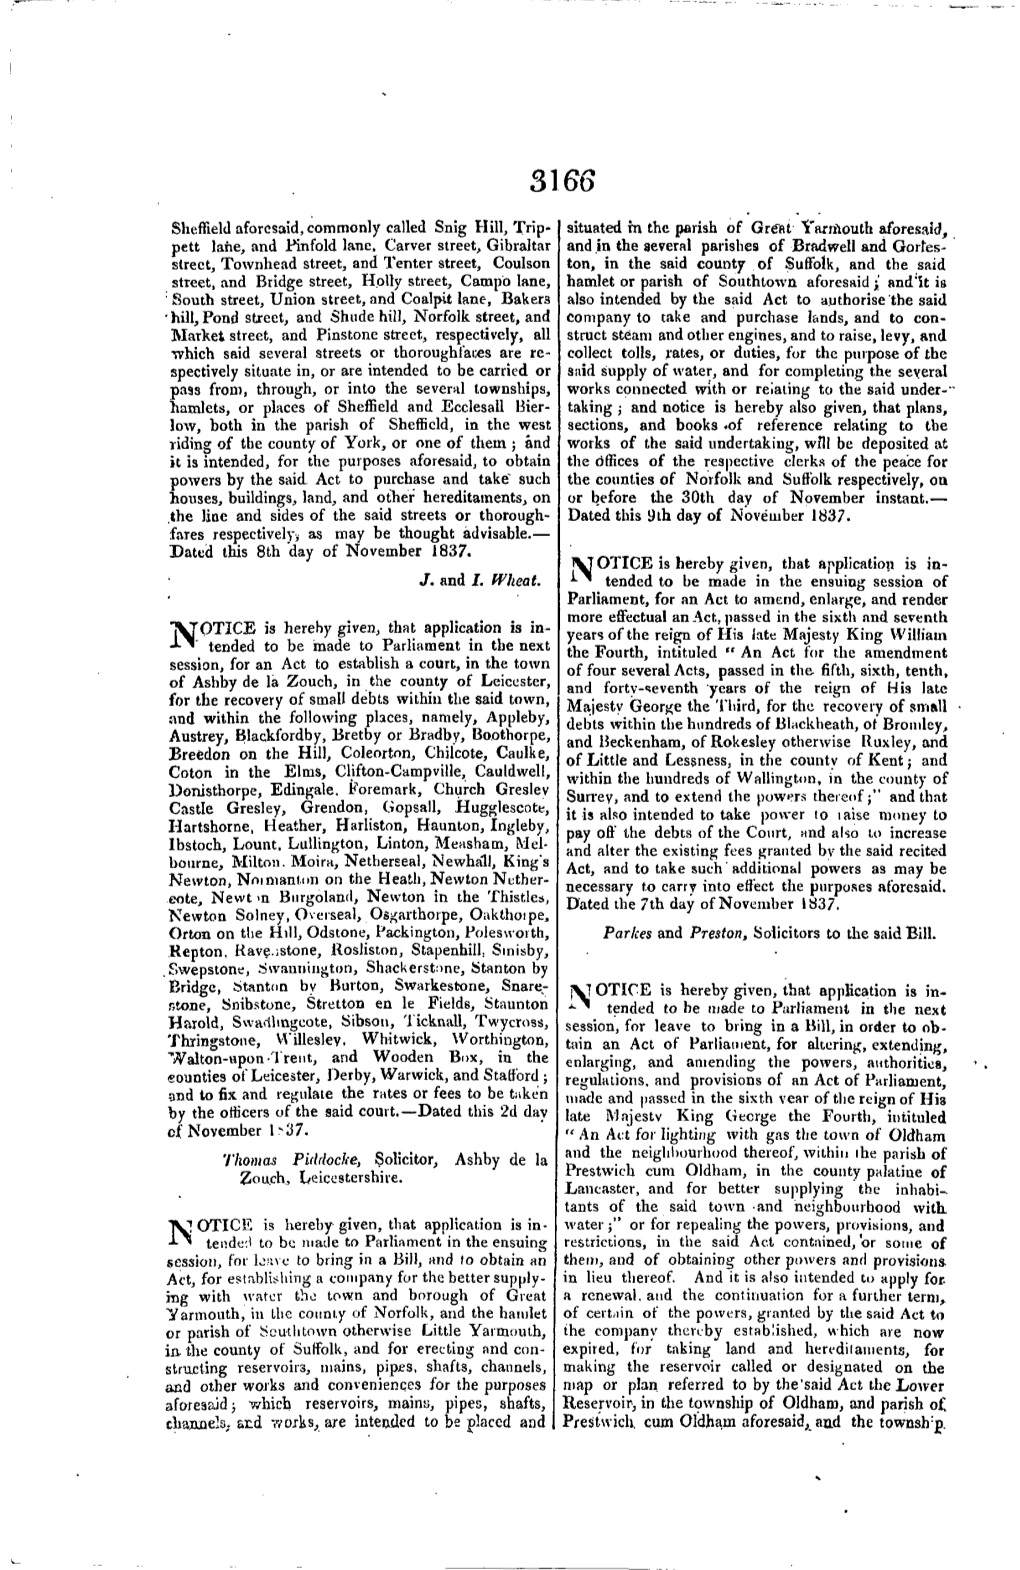 The London Gazette, Issue 19564, Page 3166